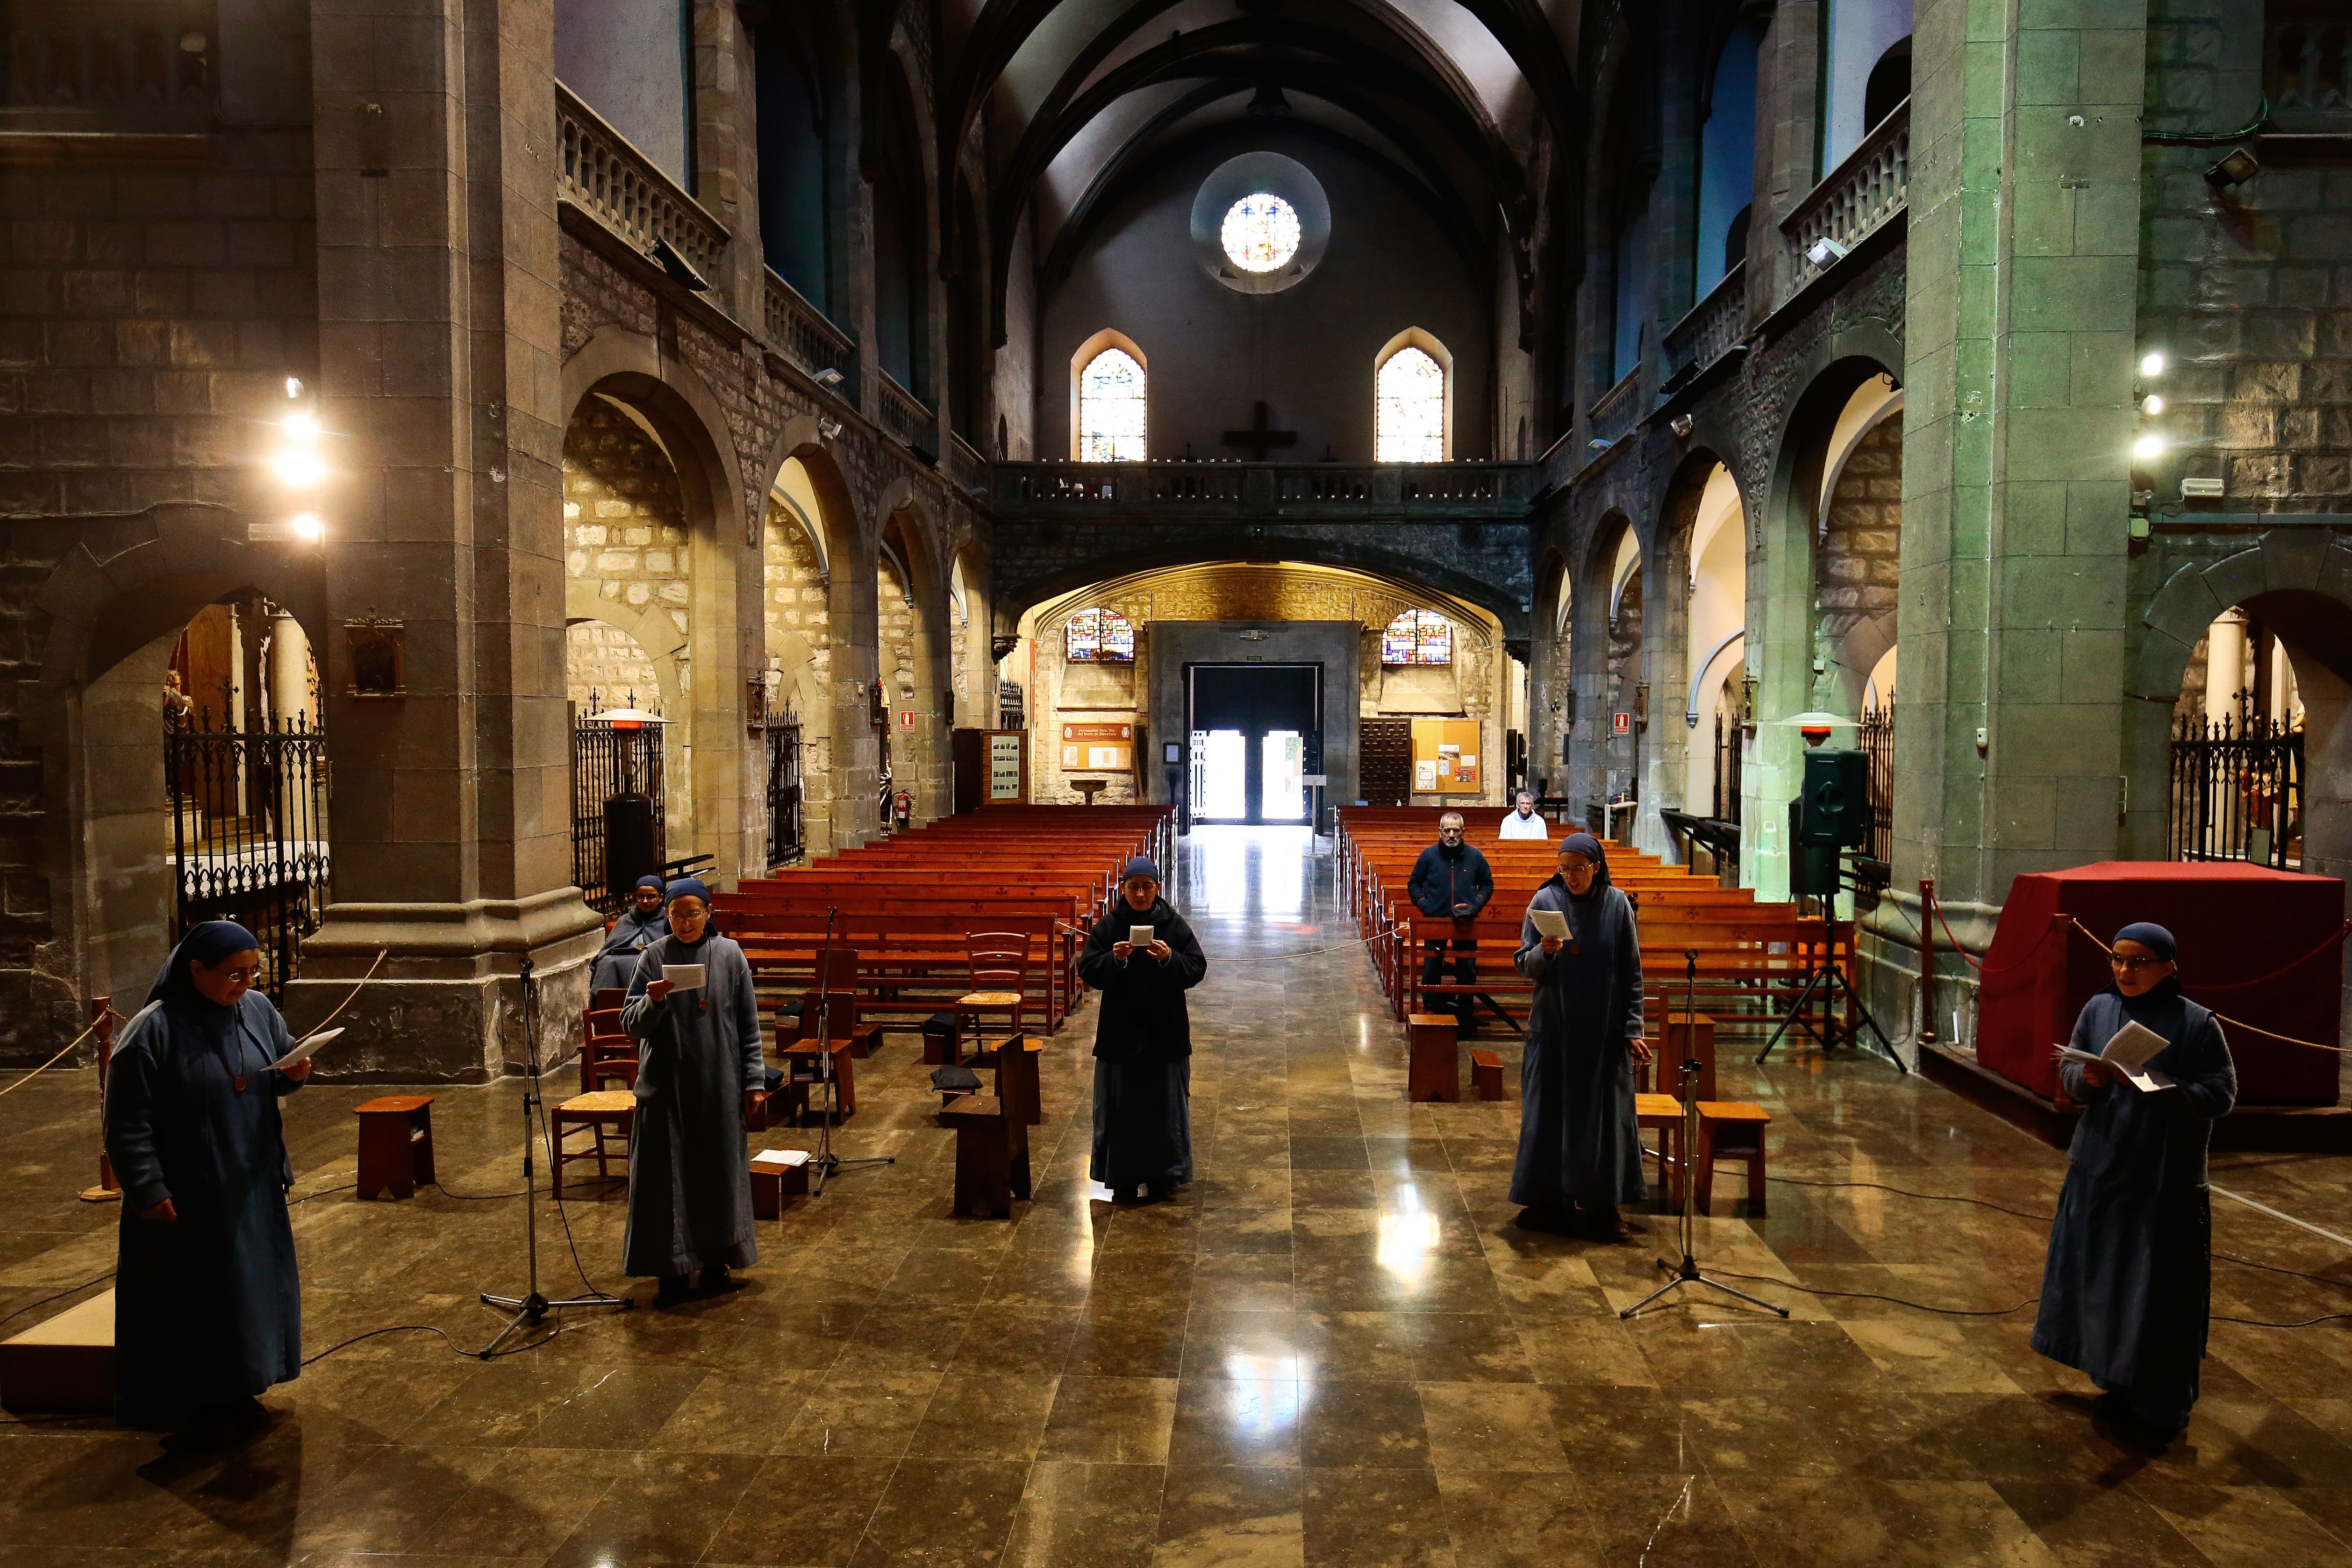 Nuns sing in an almost empty church in Barcelona on March 29